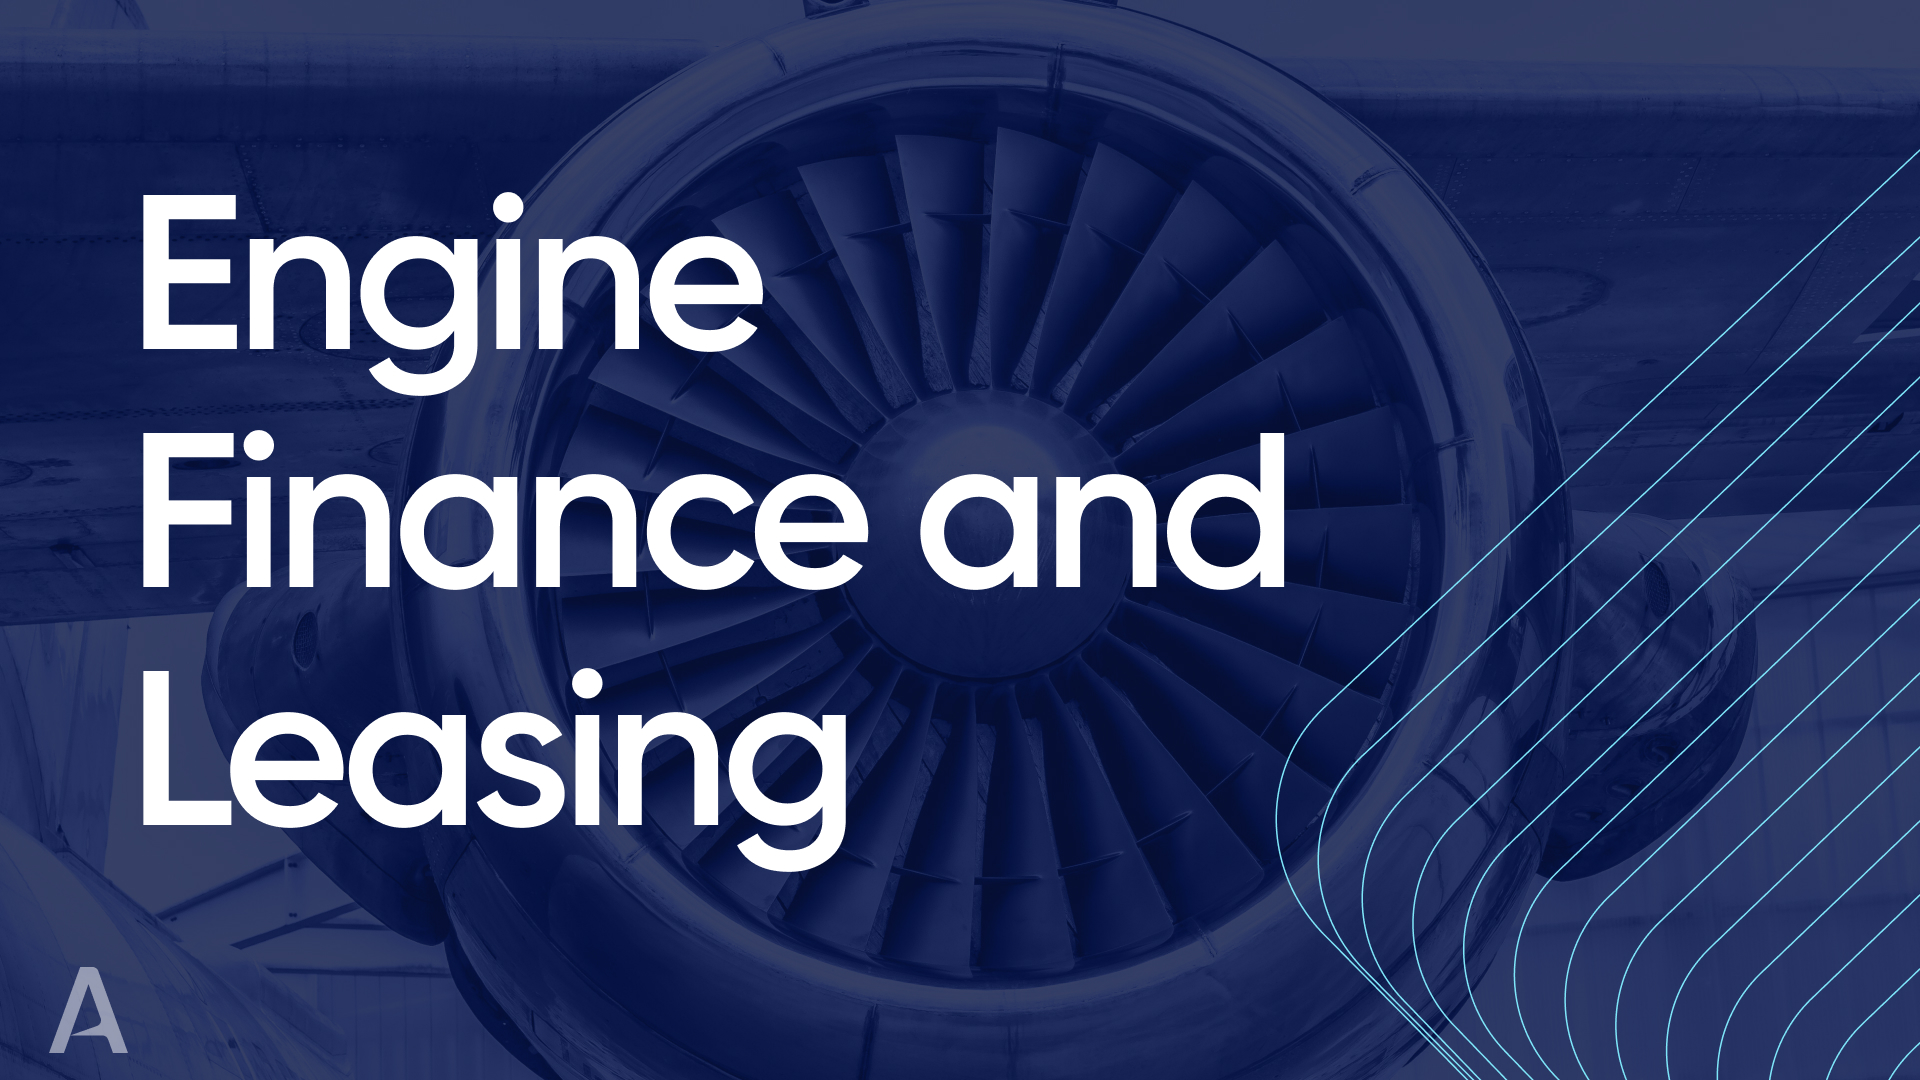 Engine Finance and Leasing